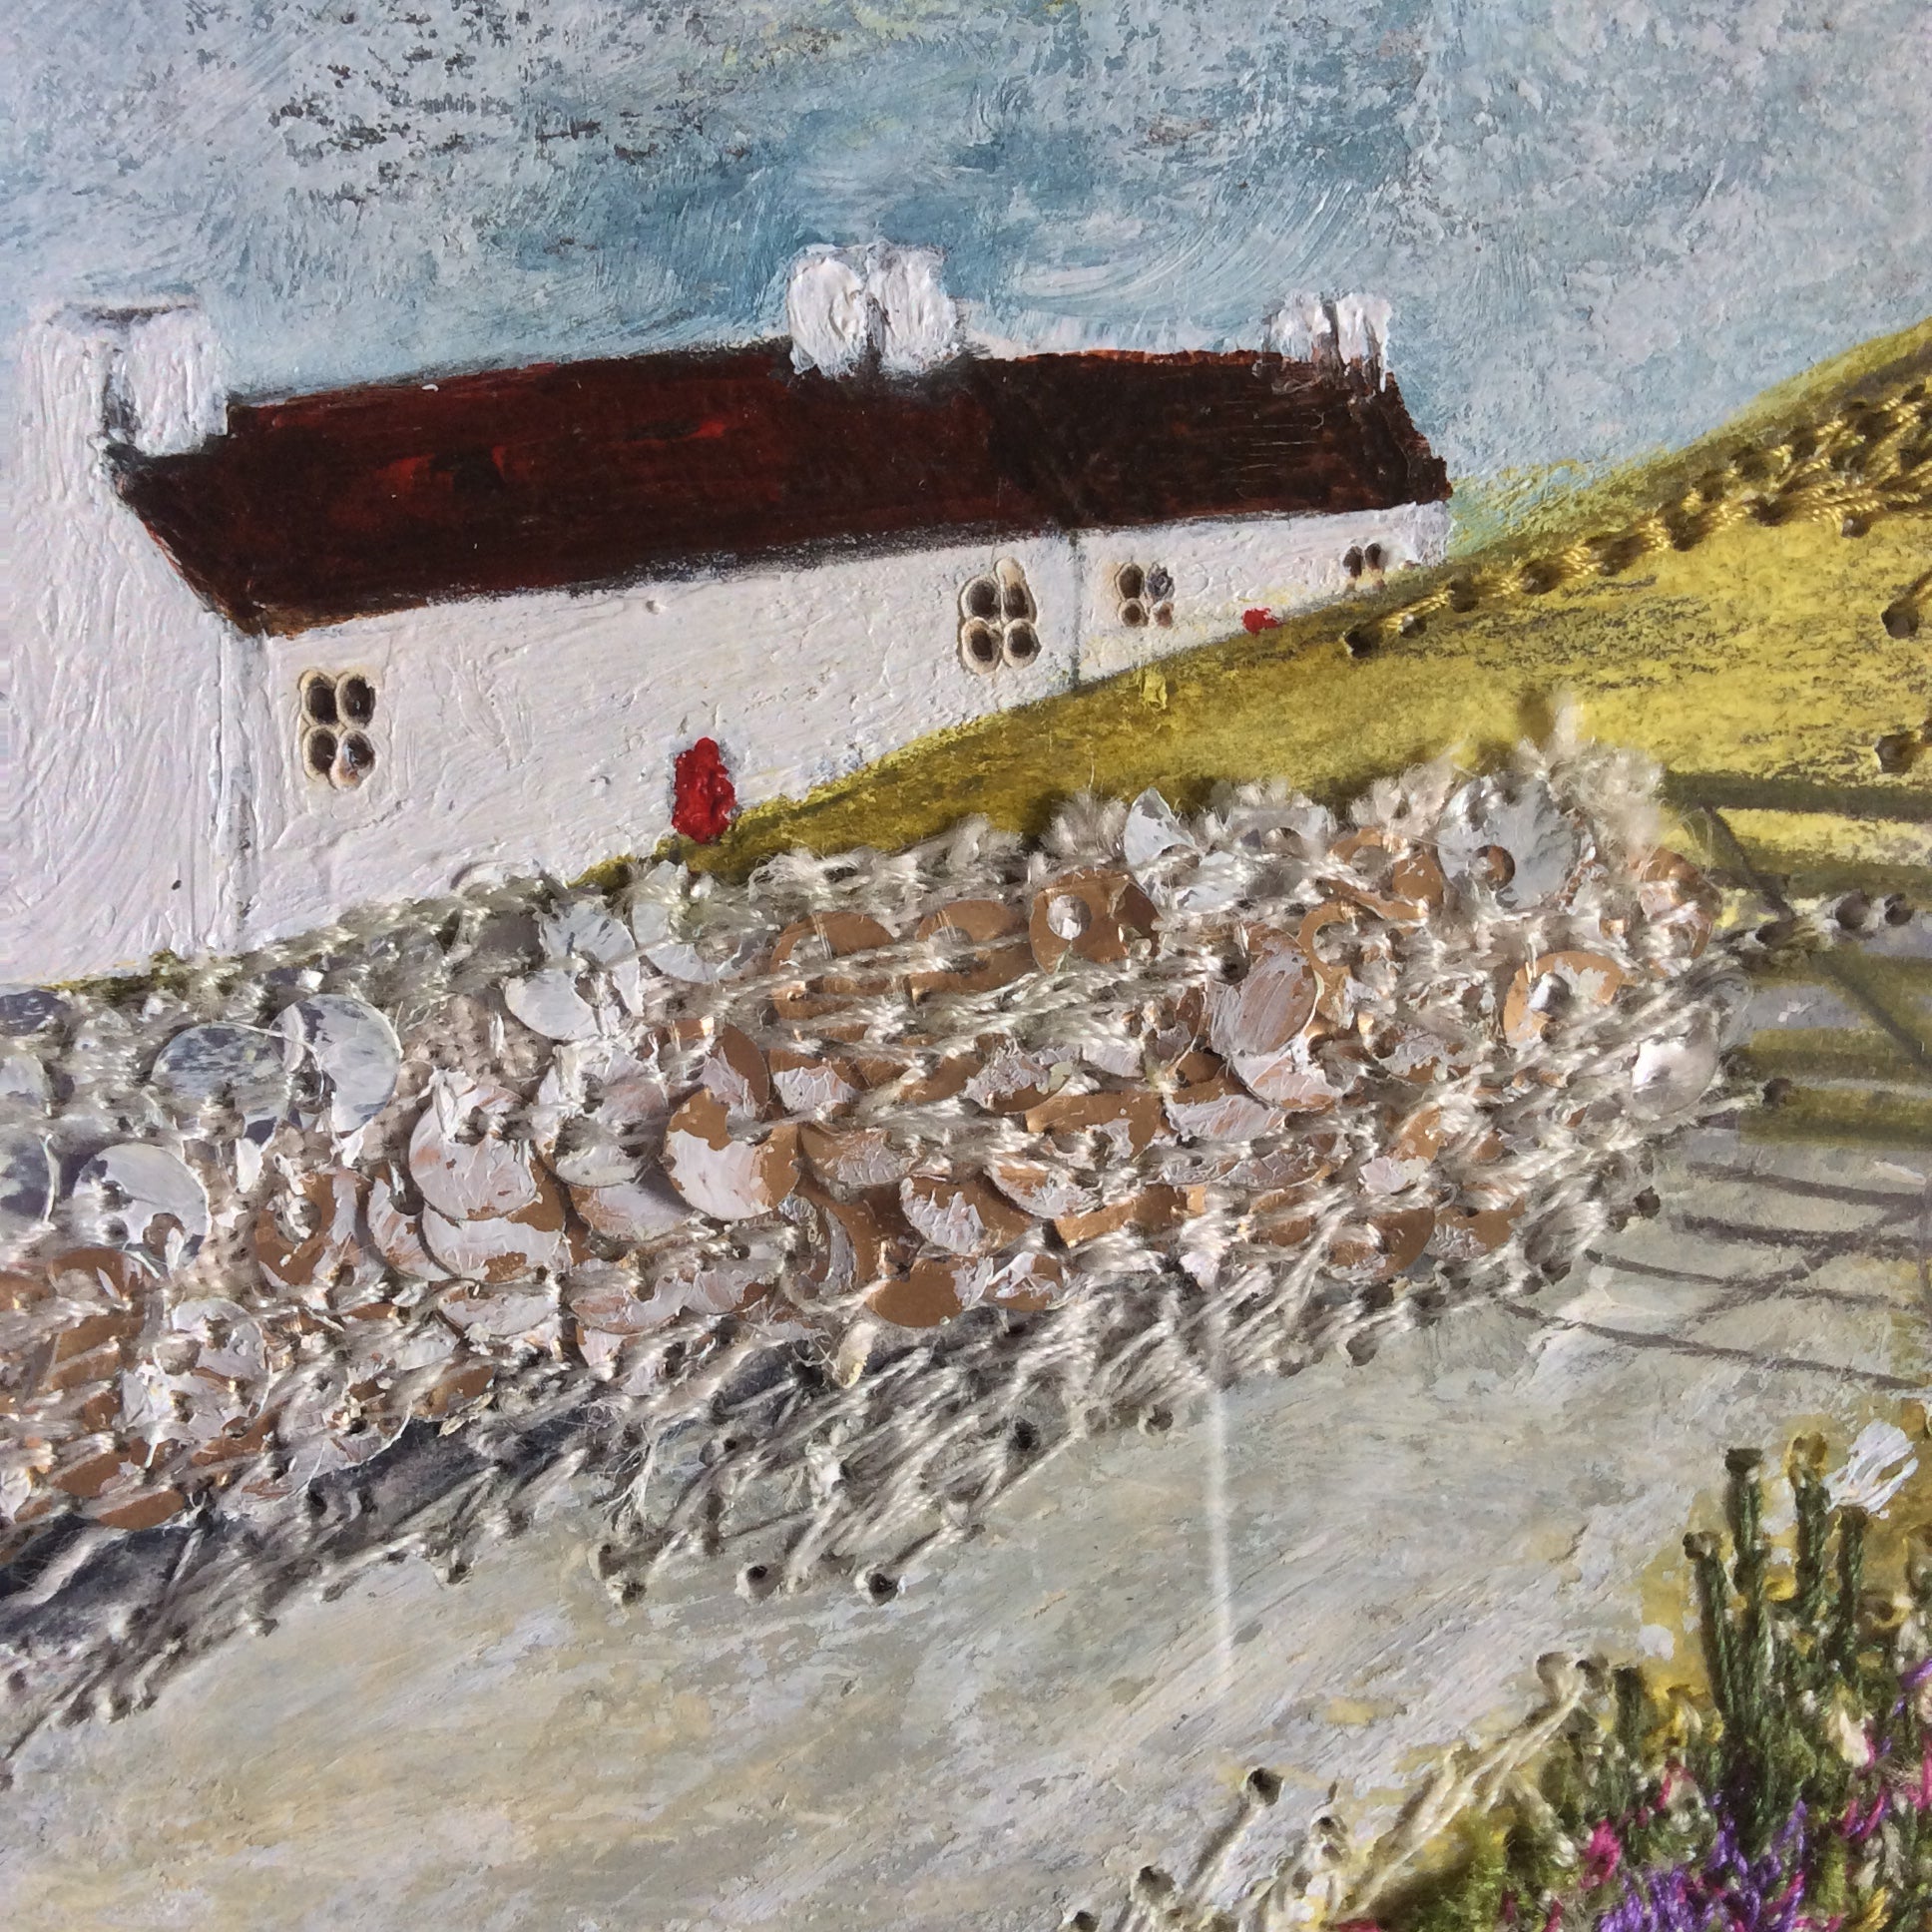 Mixed Media Art work by Louise O'Hara "Life on Lavender hill"